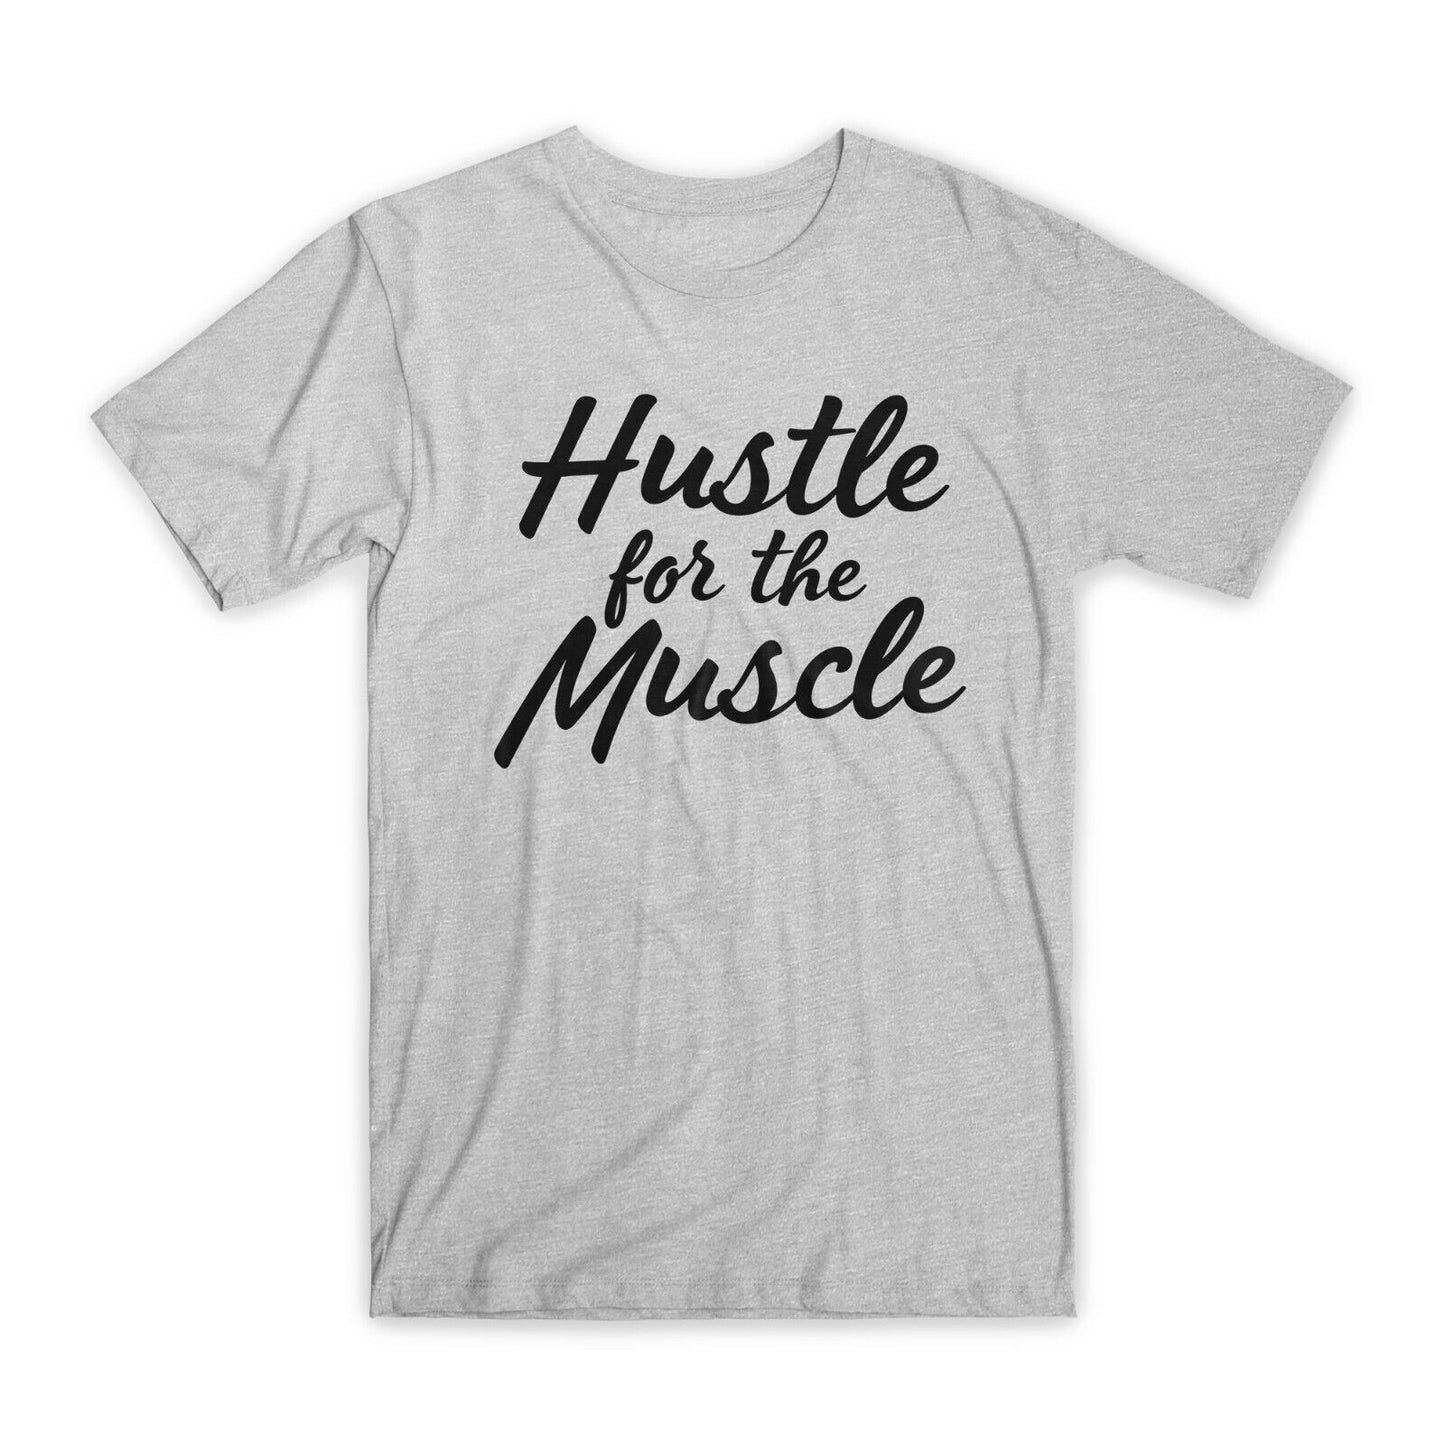 Hustle for The Muscle T-Shirt Premium Soft Cotton Crew Neck Funny Tees Gifts NEW